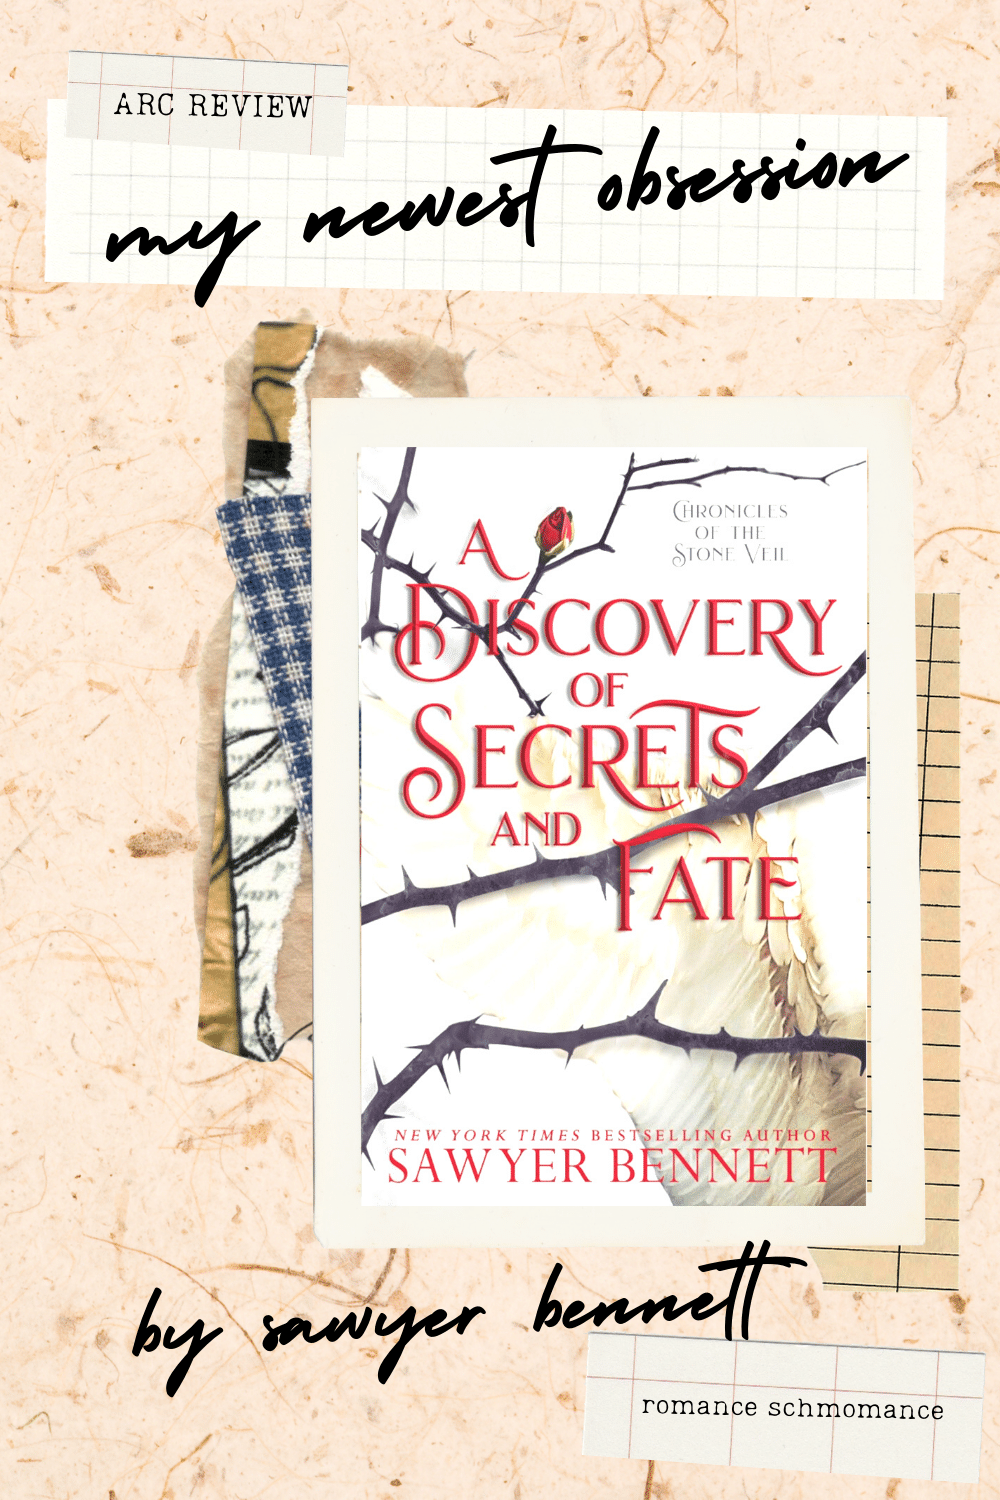 Romance Schmomance | Book Review : A Discovery of Secrets and Fate by Sawyer Bennett